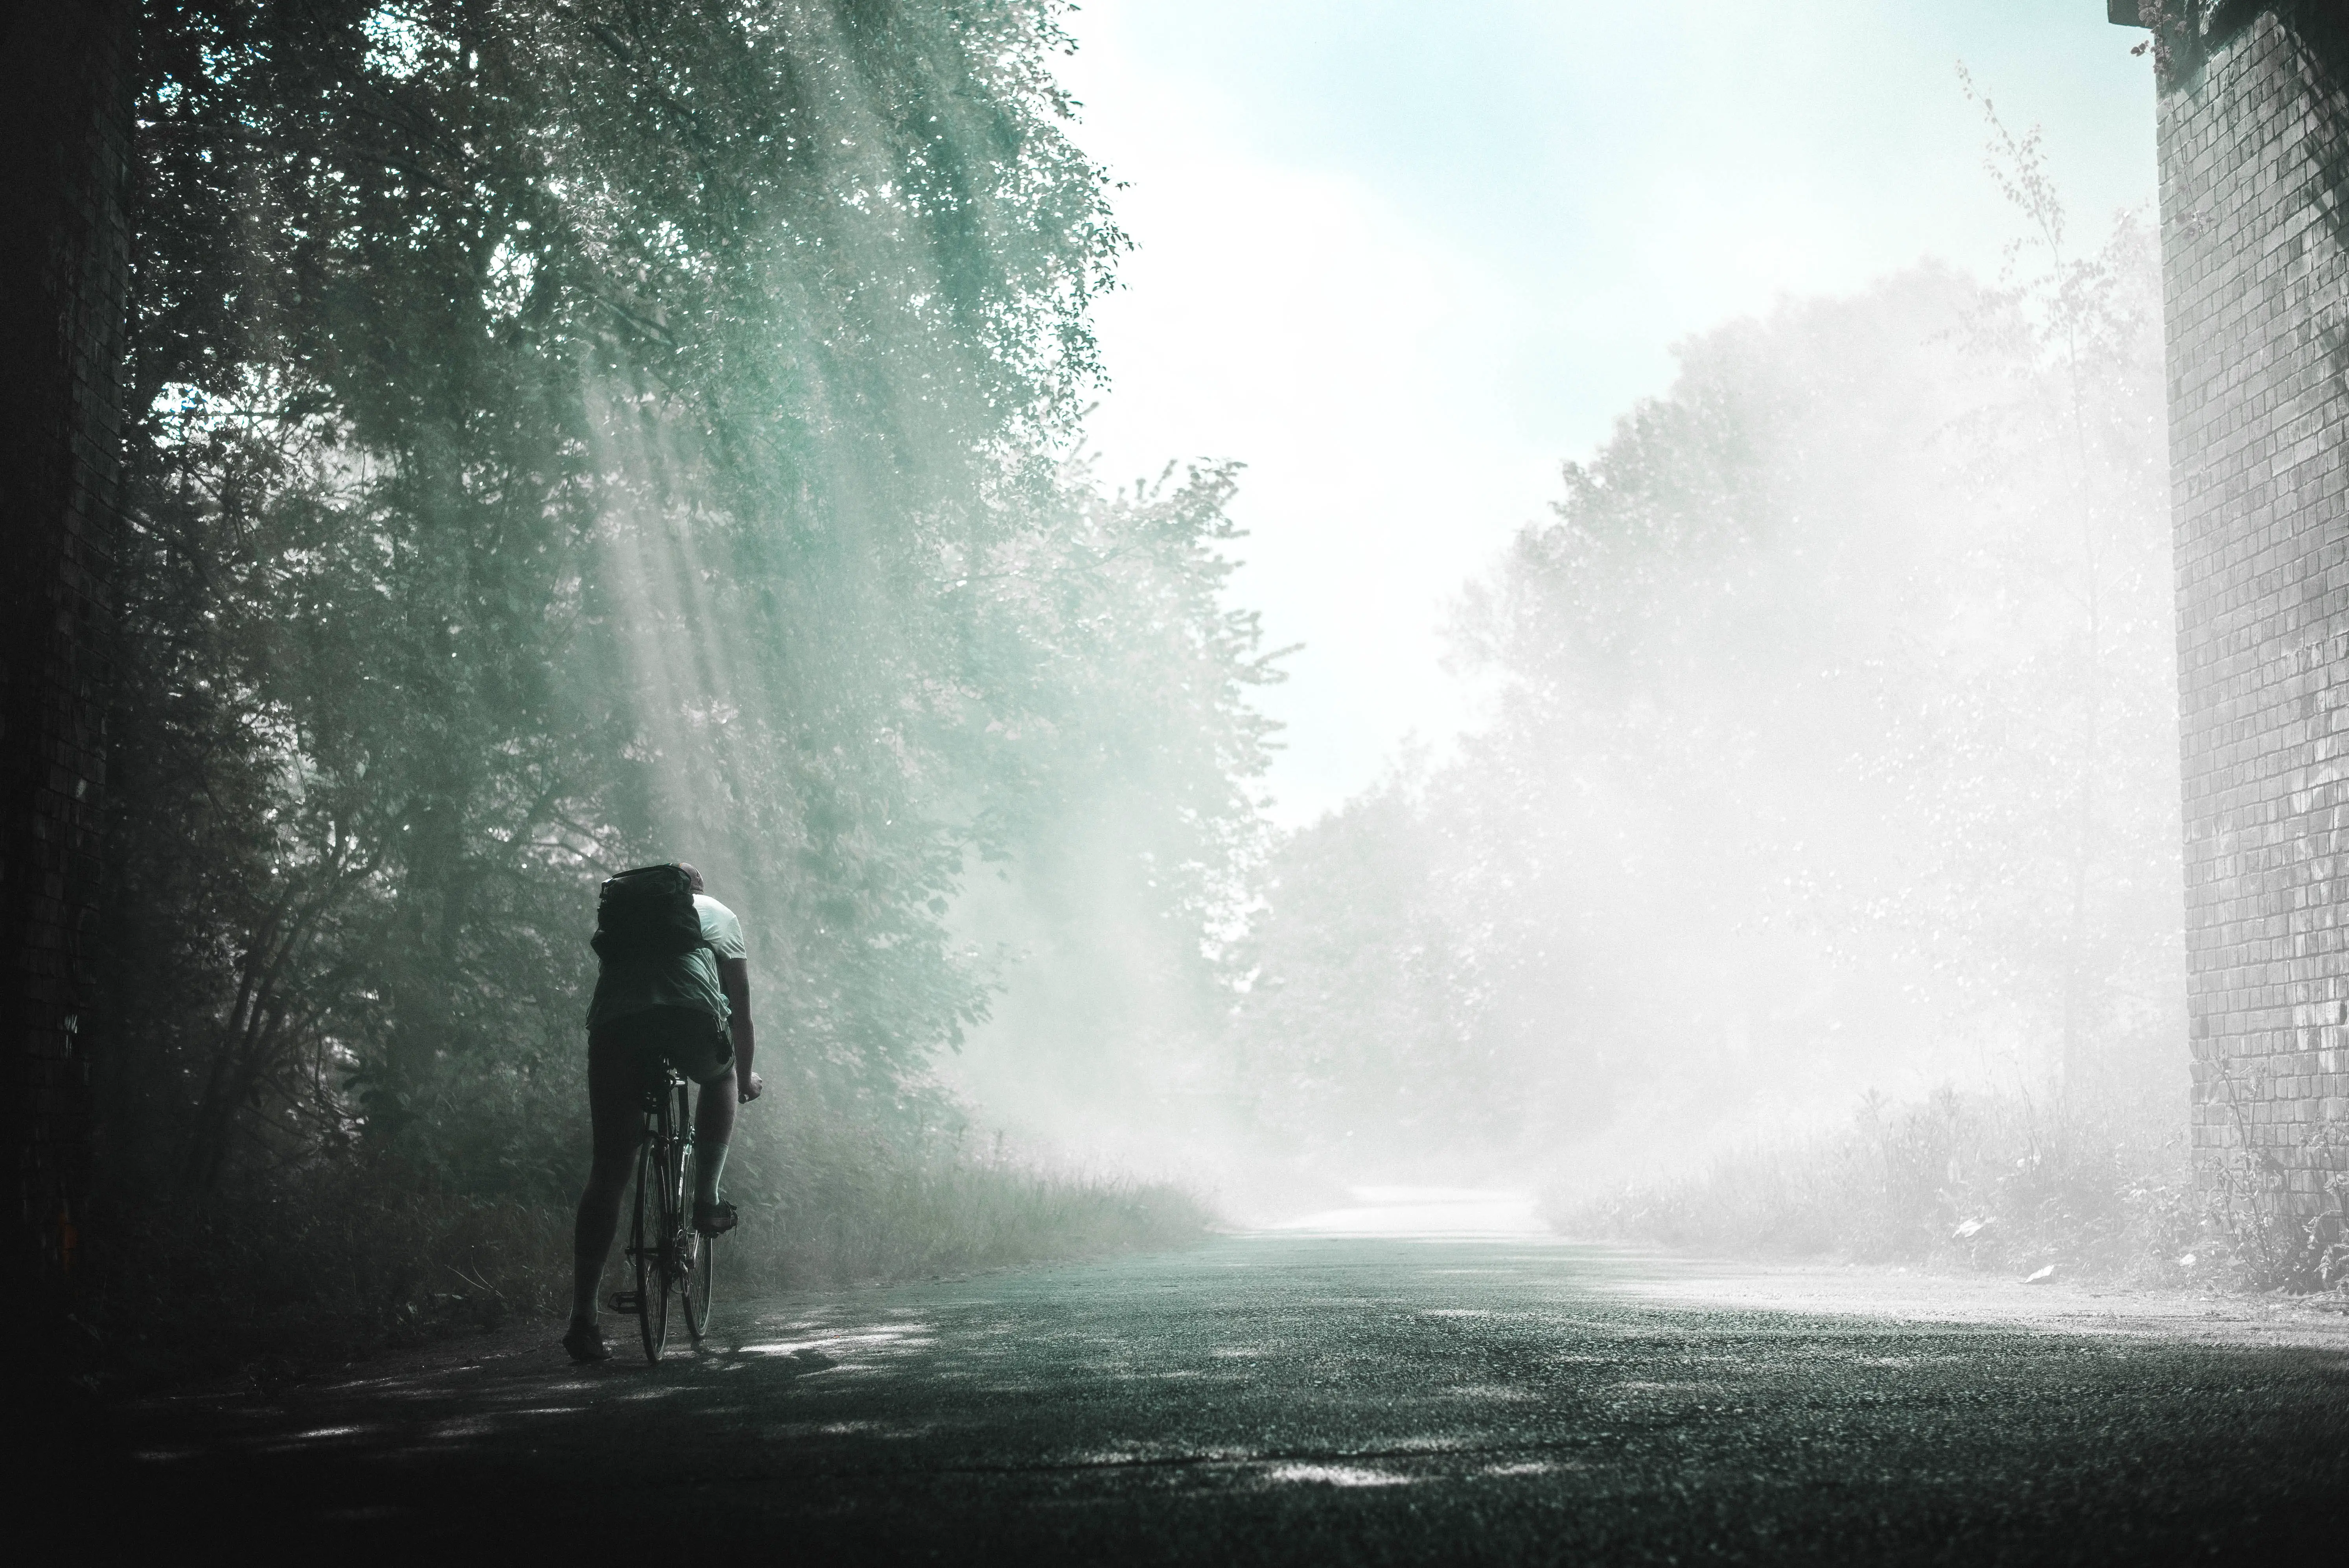 An image of a person cycling on a road with proper posture and form.